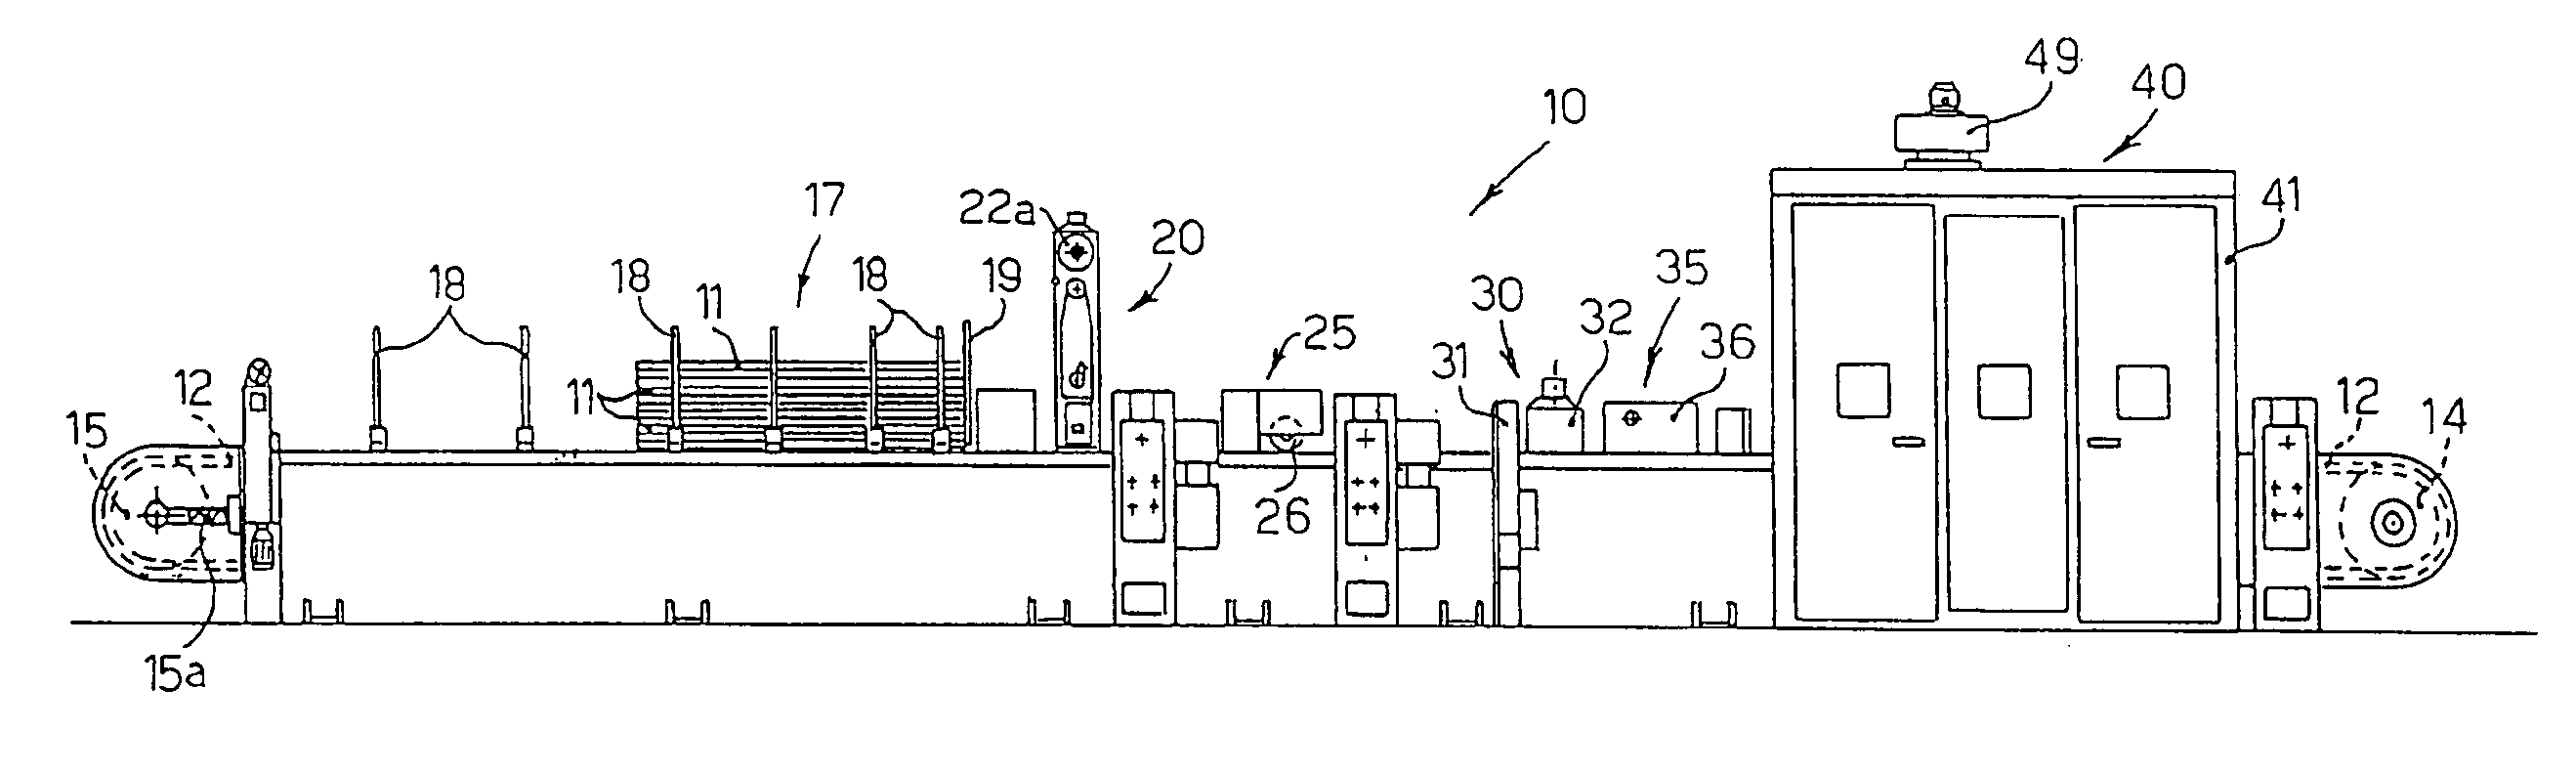 Apparatus and method for painting objects such as profiles, panels or suchlike